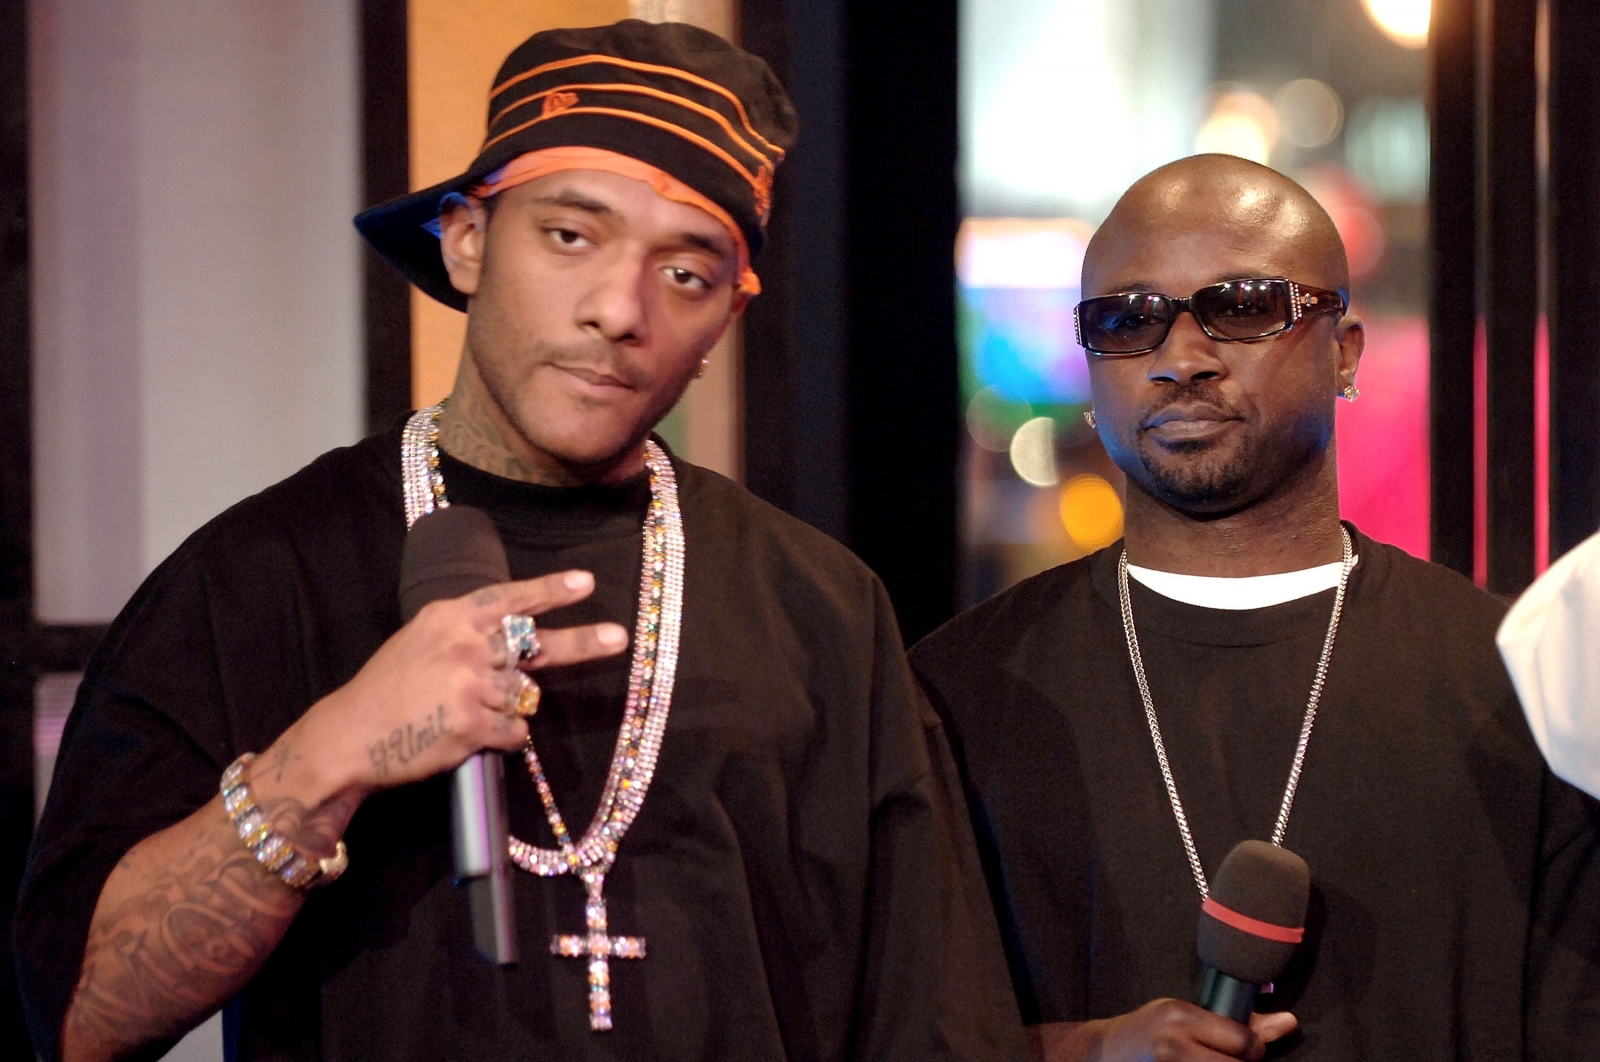 Mobb Deep rapper Prodigy dies suddenly at age 42